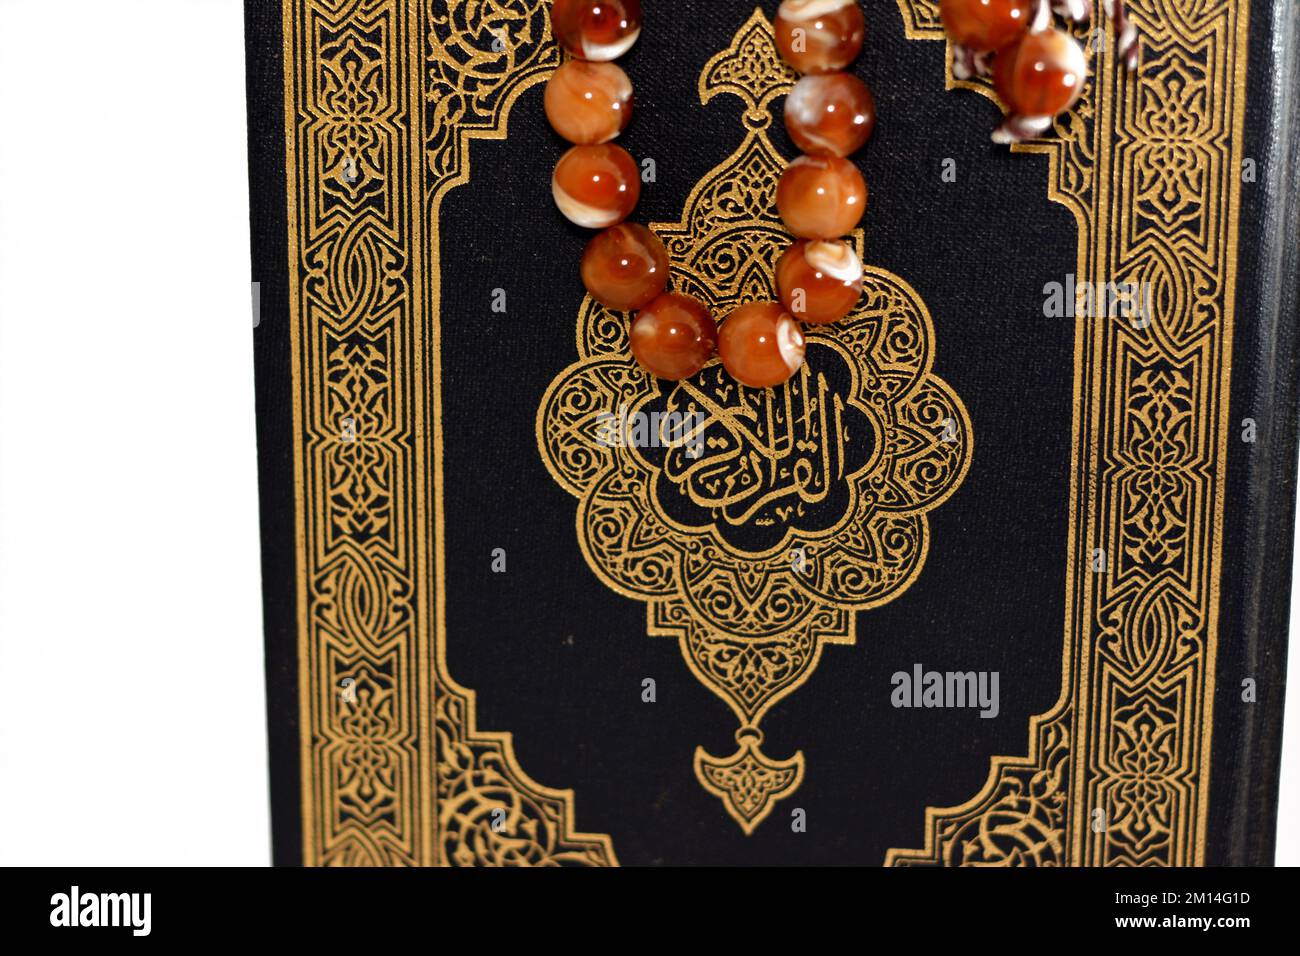 The holy Quran, Qur'an or Koran (the recitation) is the central religious text of Islam, believed by Muslims to be a revelation from God (Allah), isol Stock Photo